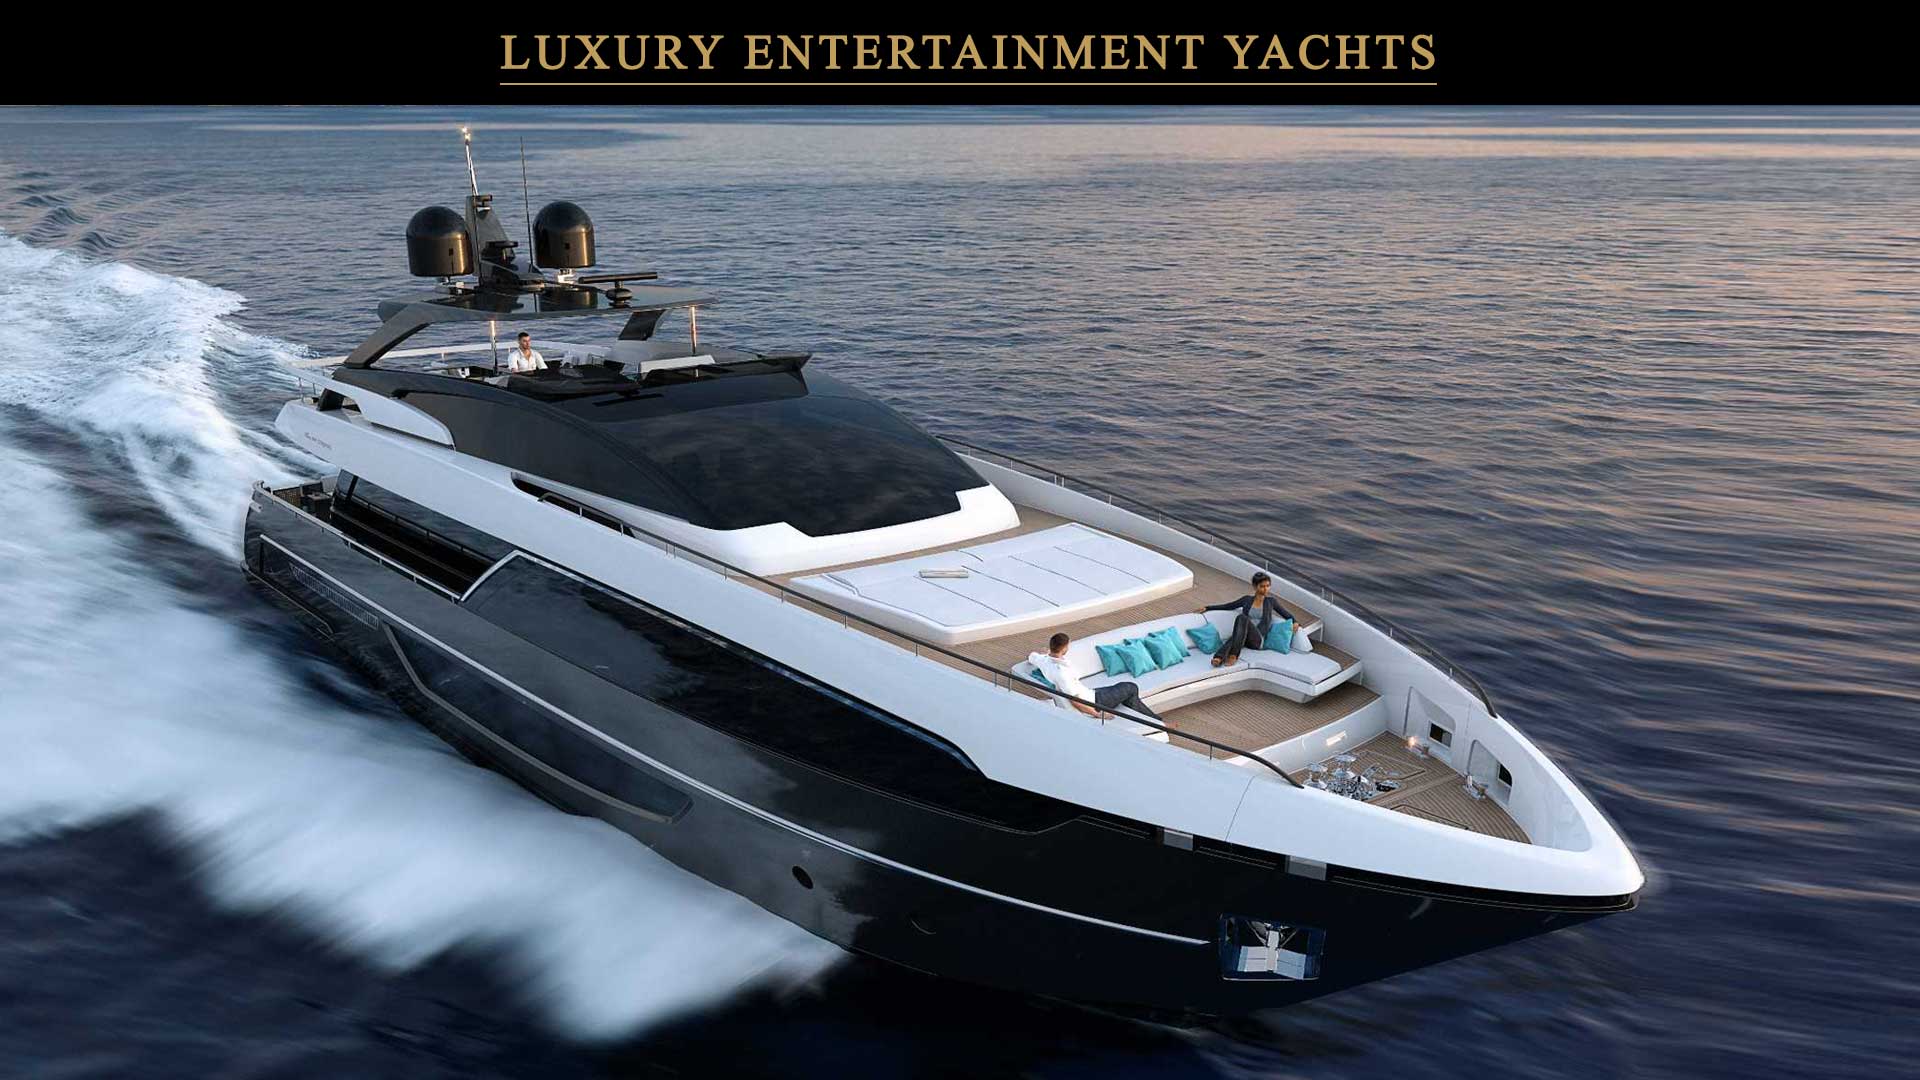 SALT Luxury Miami your source for Luxury Private Entertainment Yacht Charters in South Beach